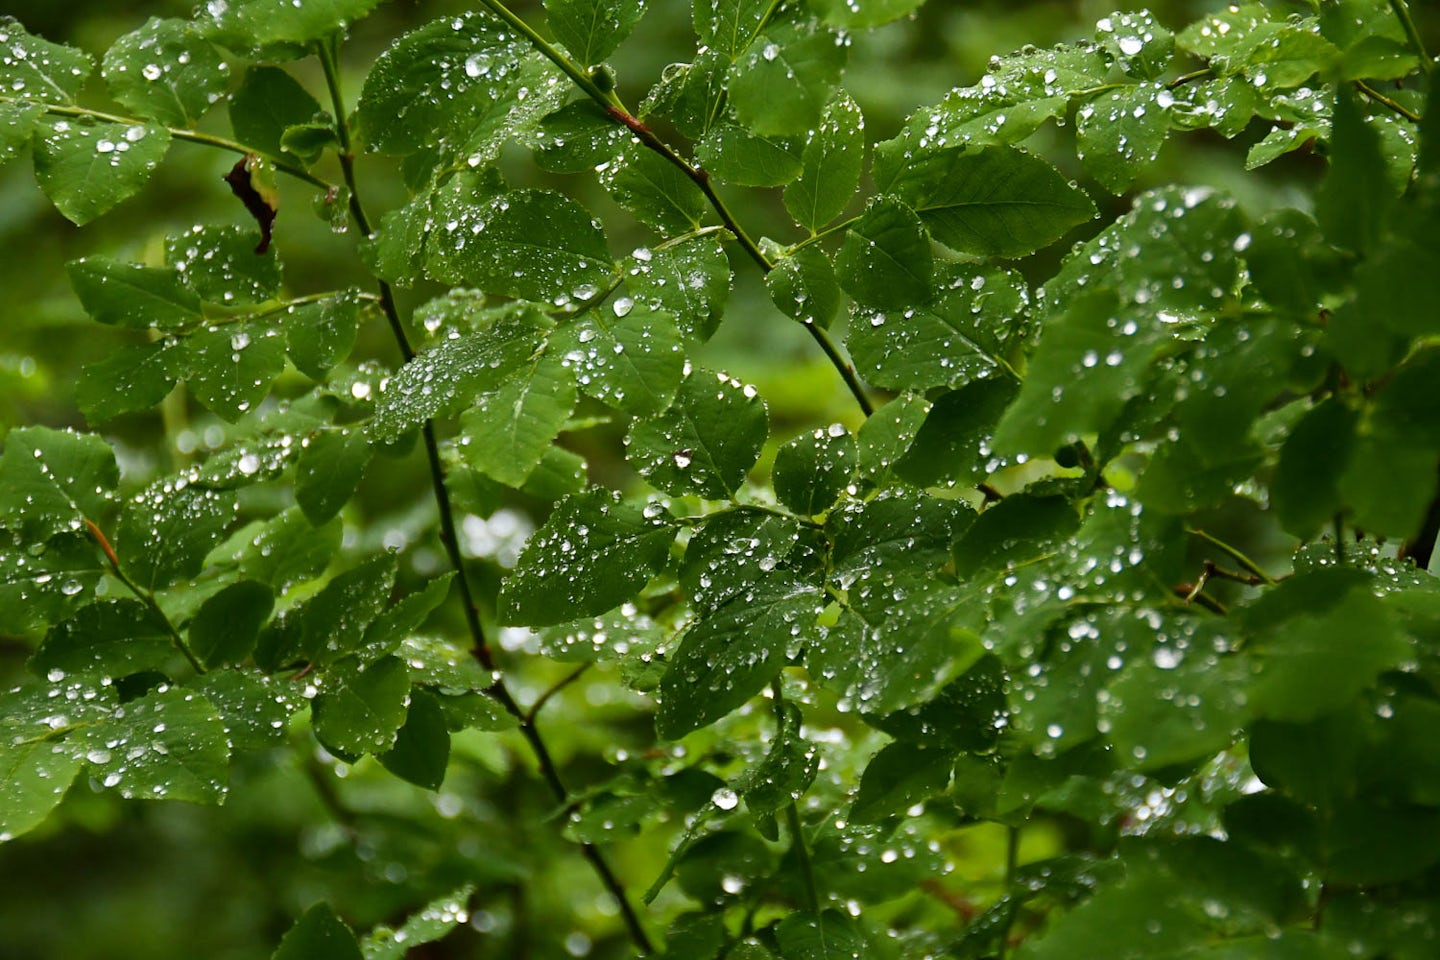 Leaves and droplets, nature trail